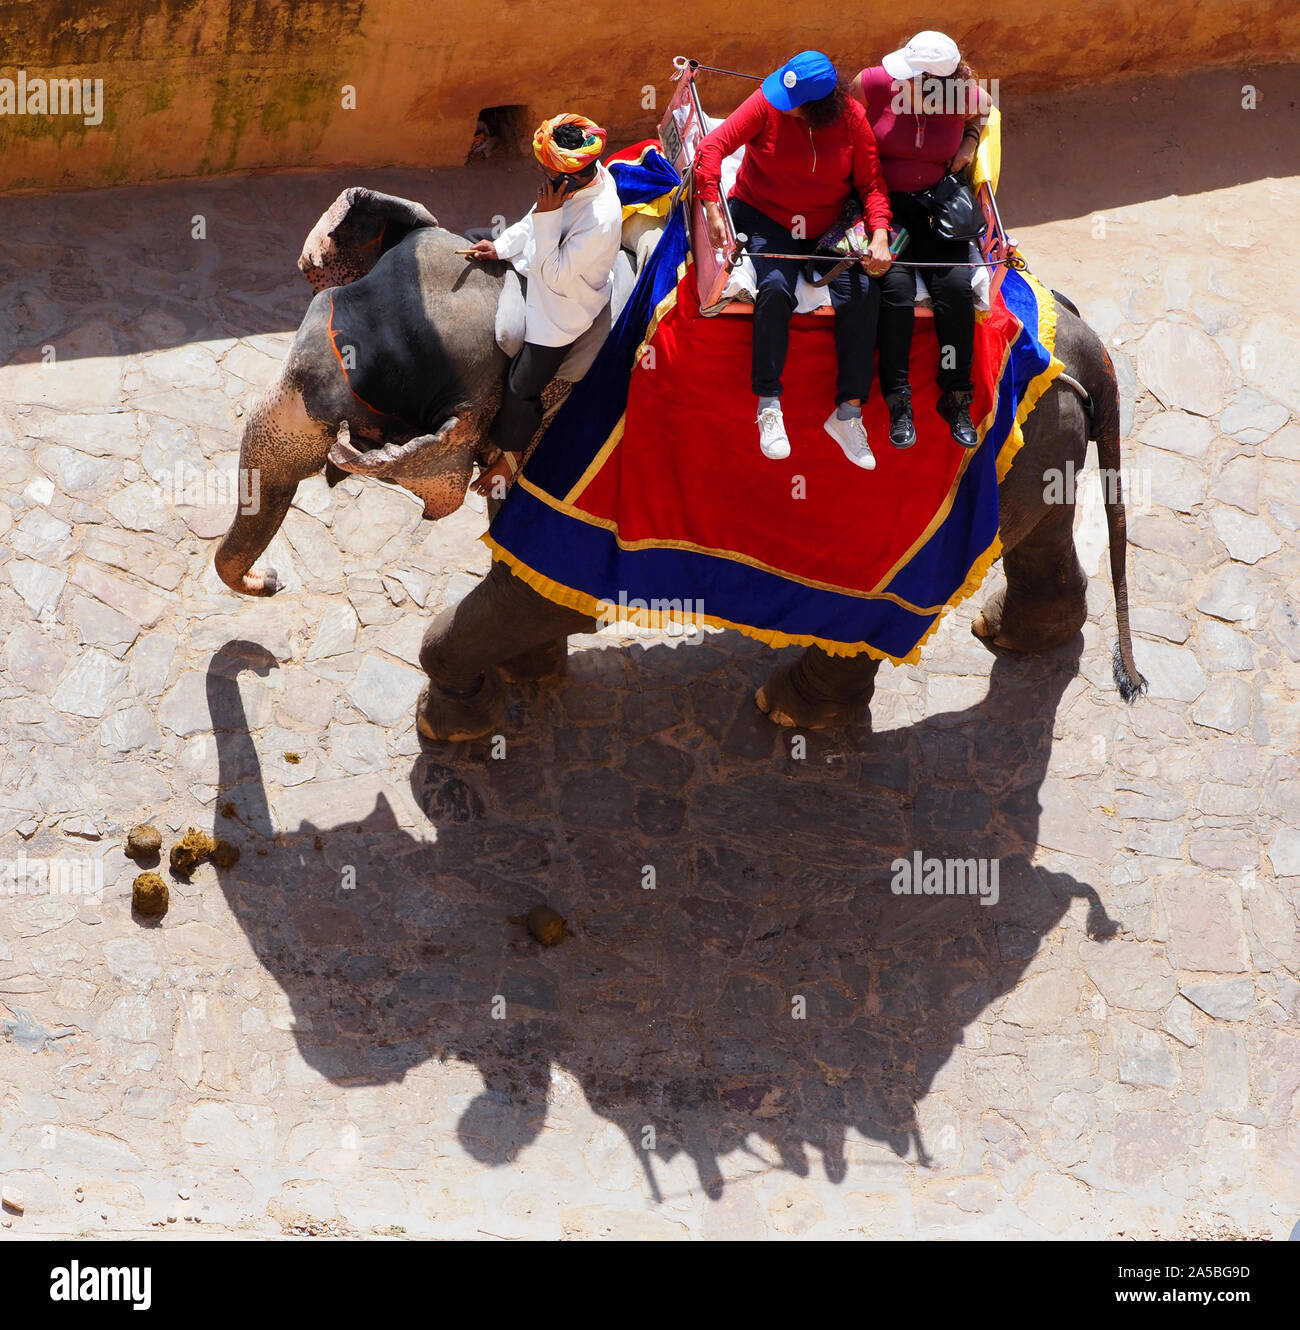 Elephants working taking tourists to the Amber Fort Palace complex, Jaipur, Rajasthan, India. Stock Photo